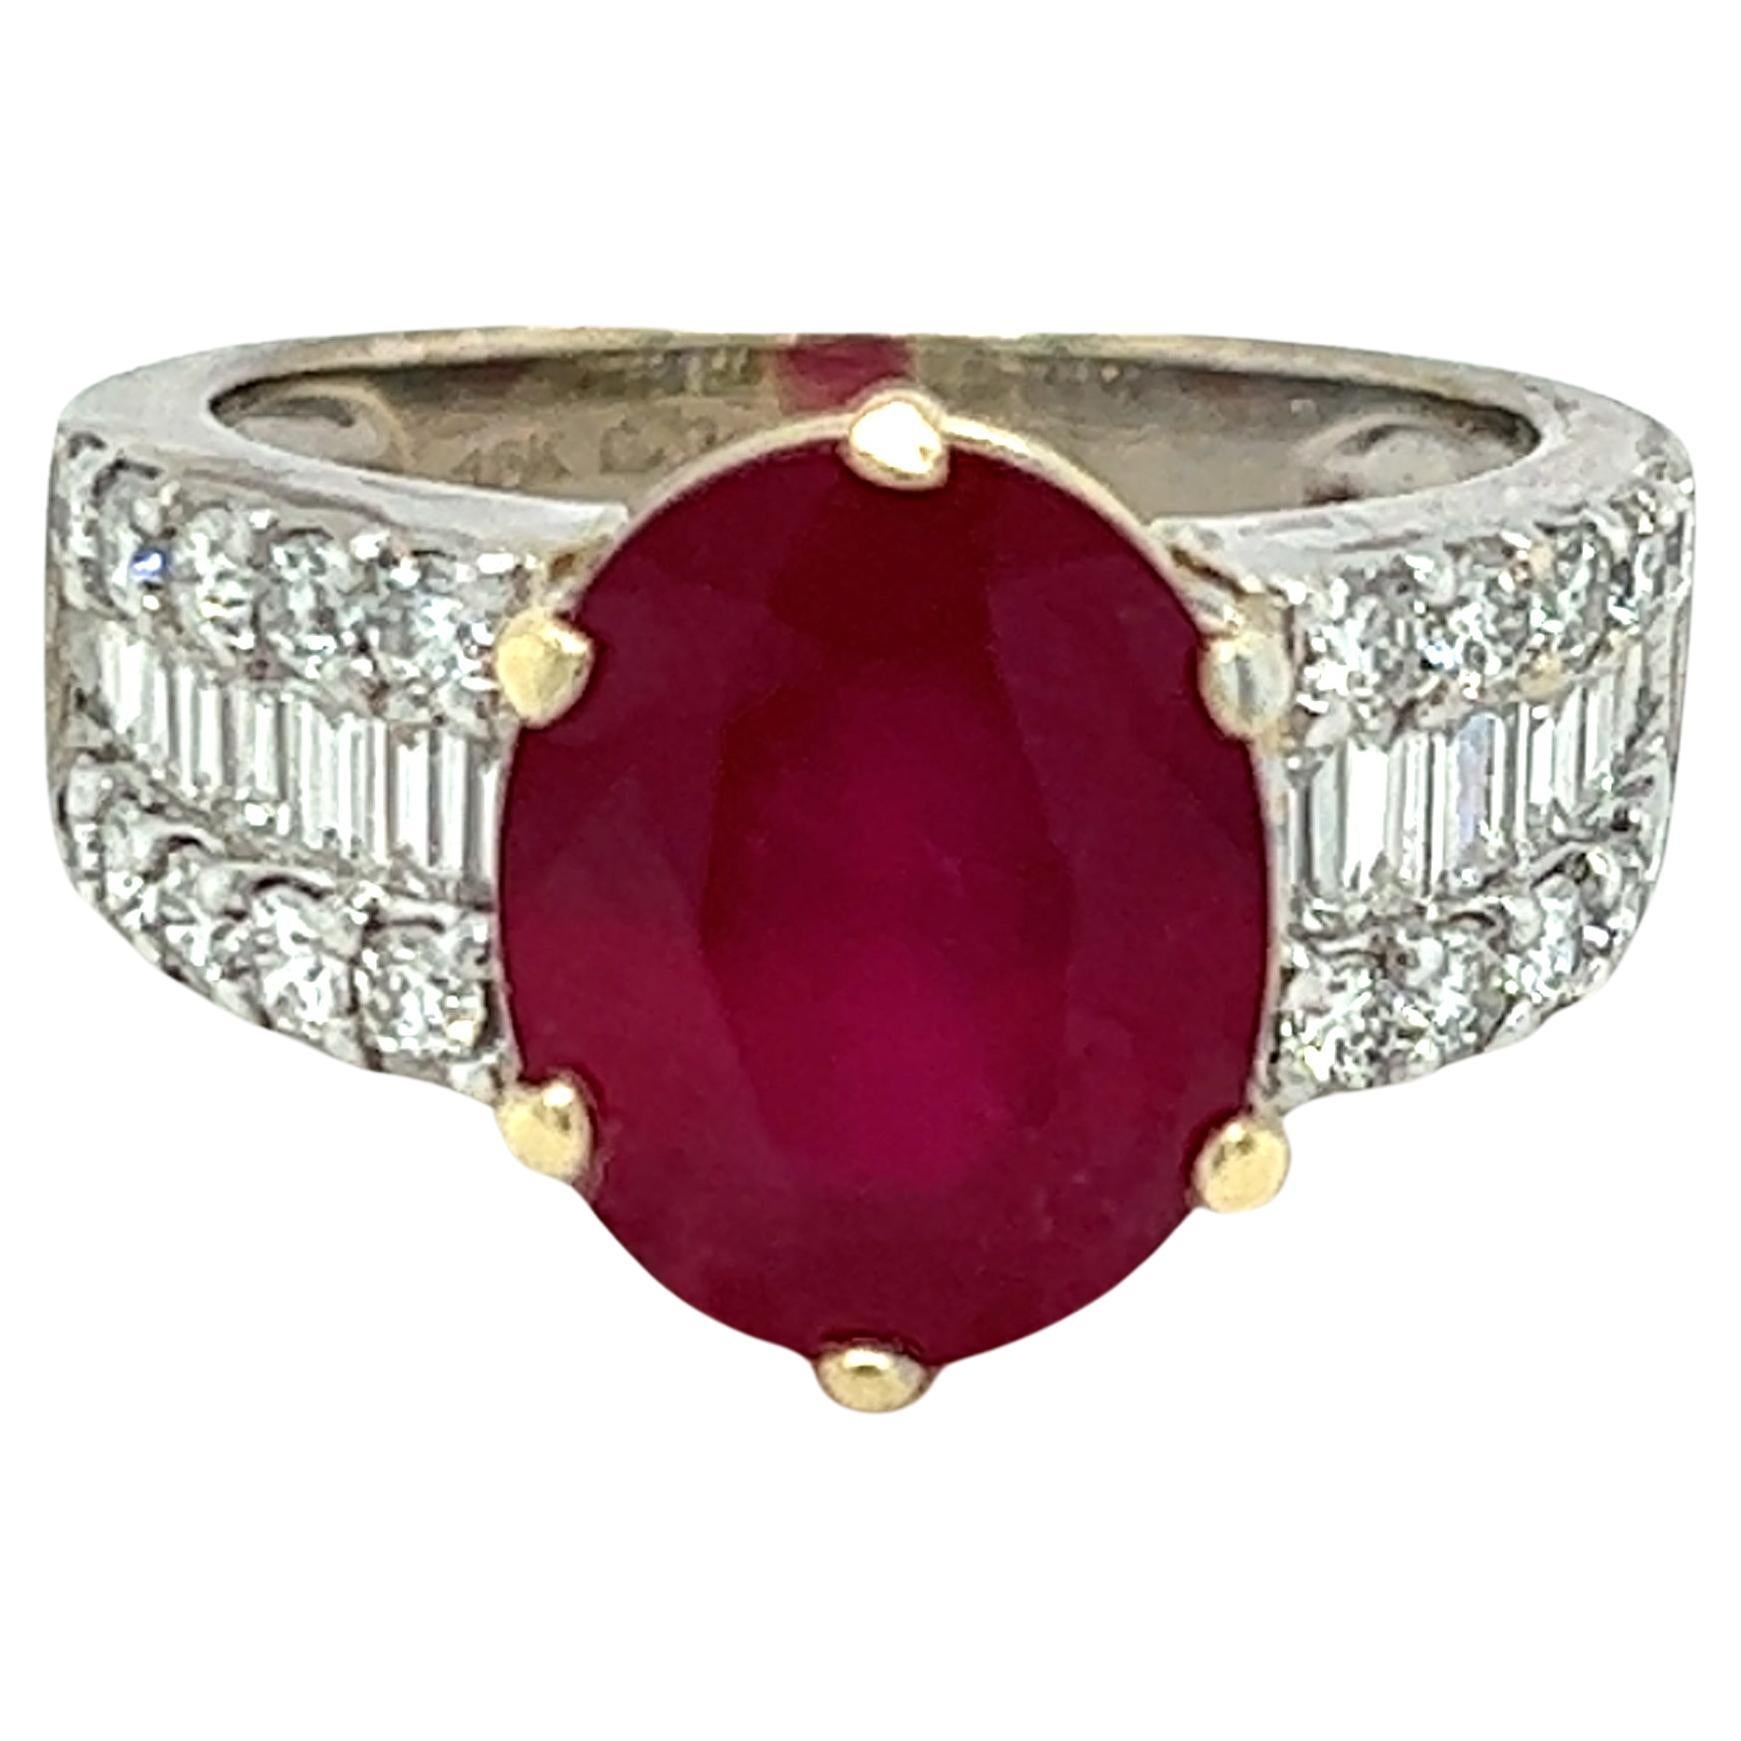 Oval 5.71 Carat Natural Ruby & Diamond Ring in 18K Gold For Sale